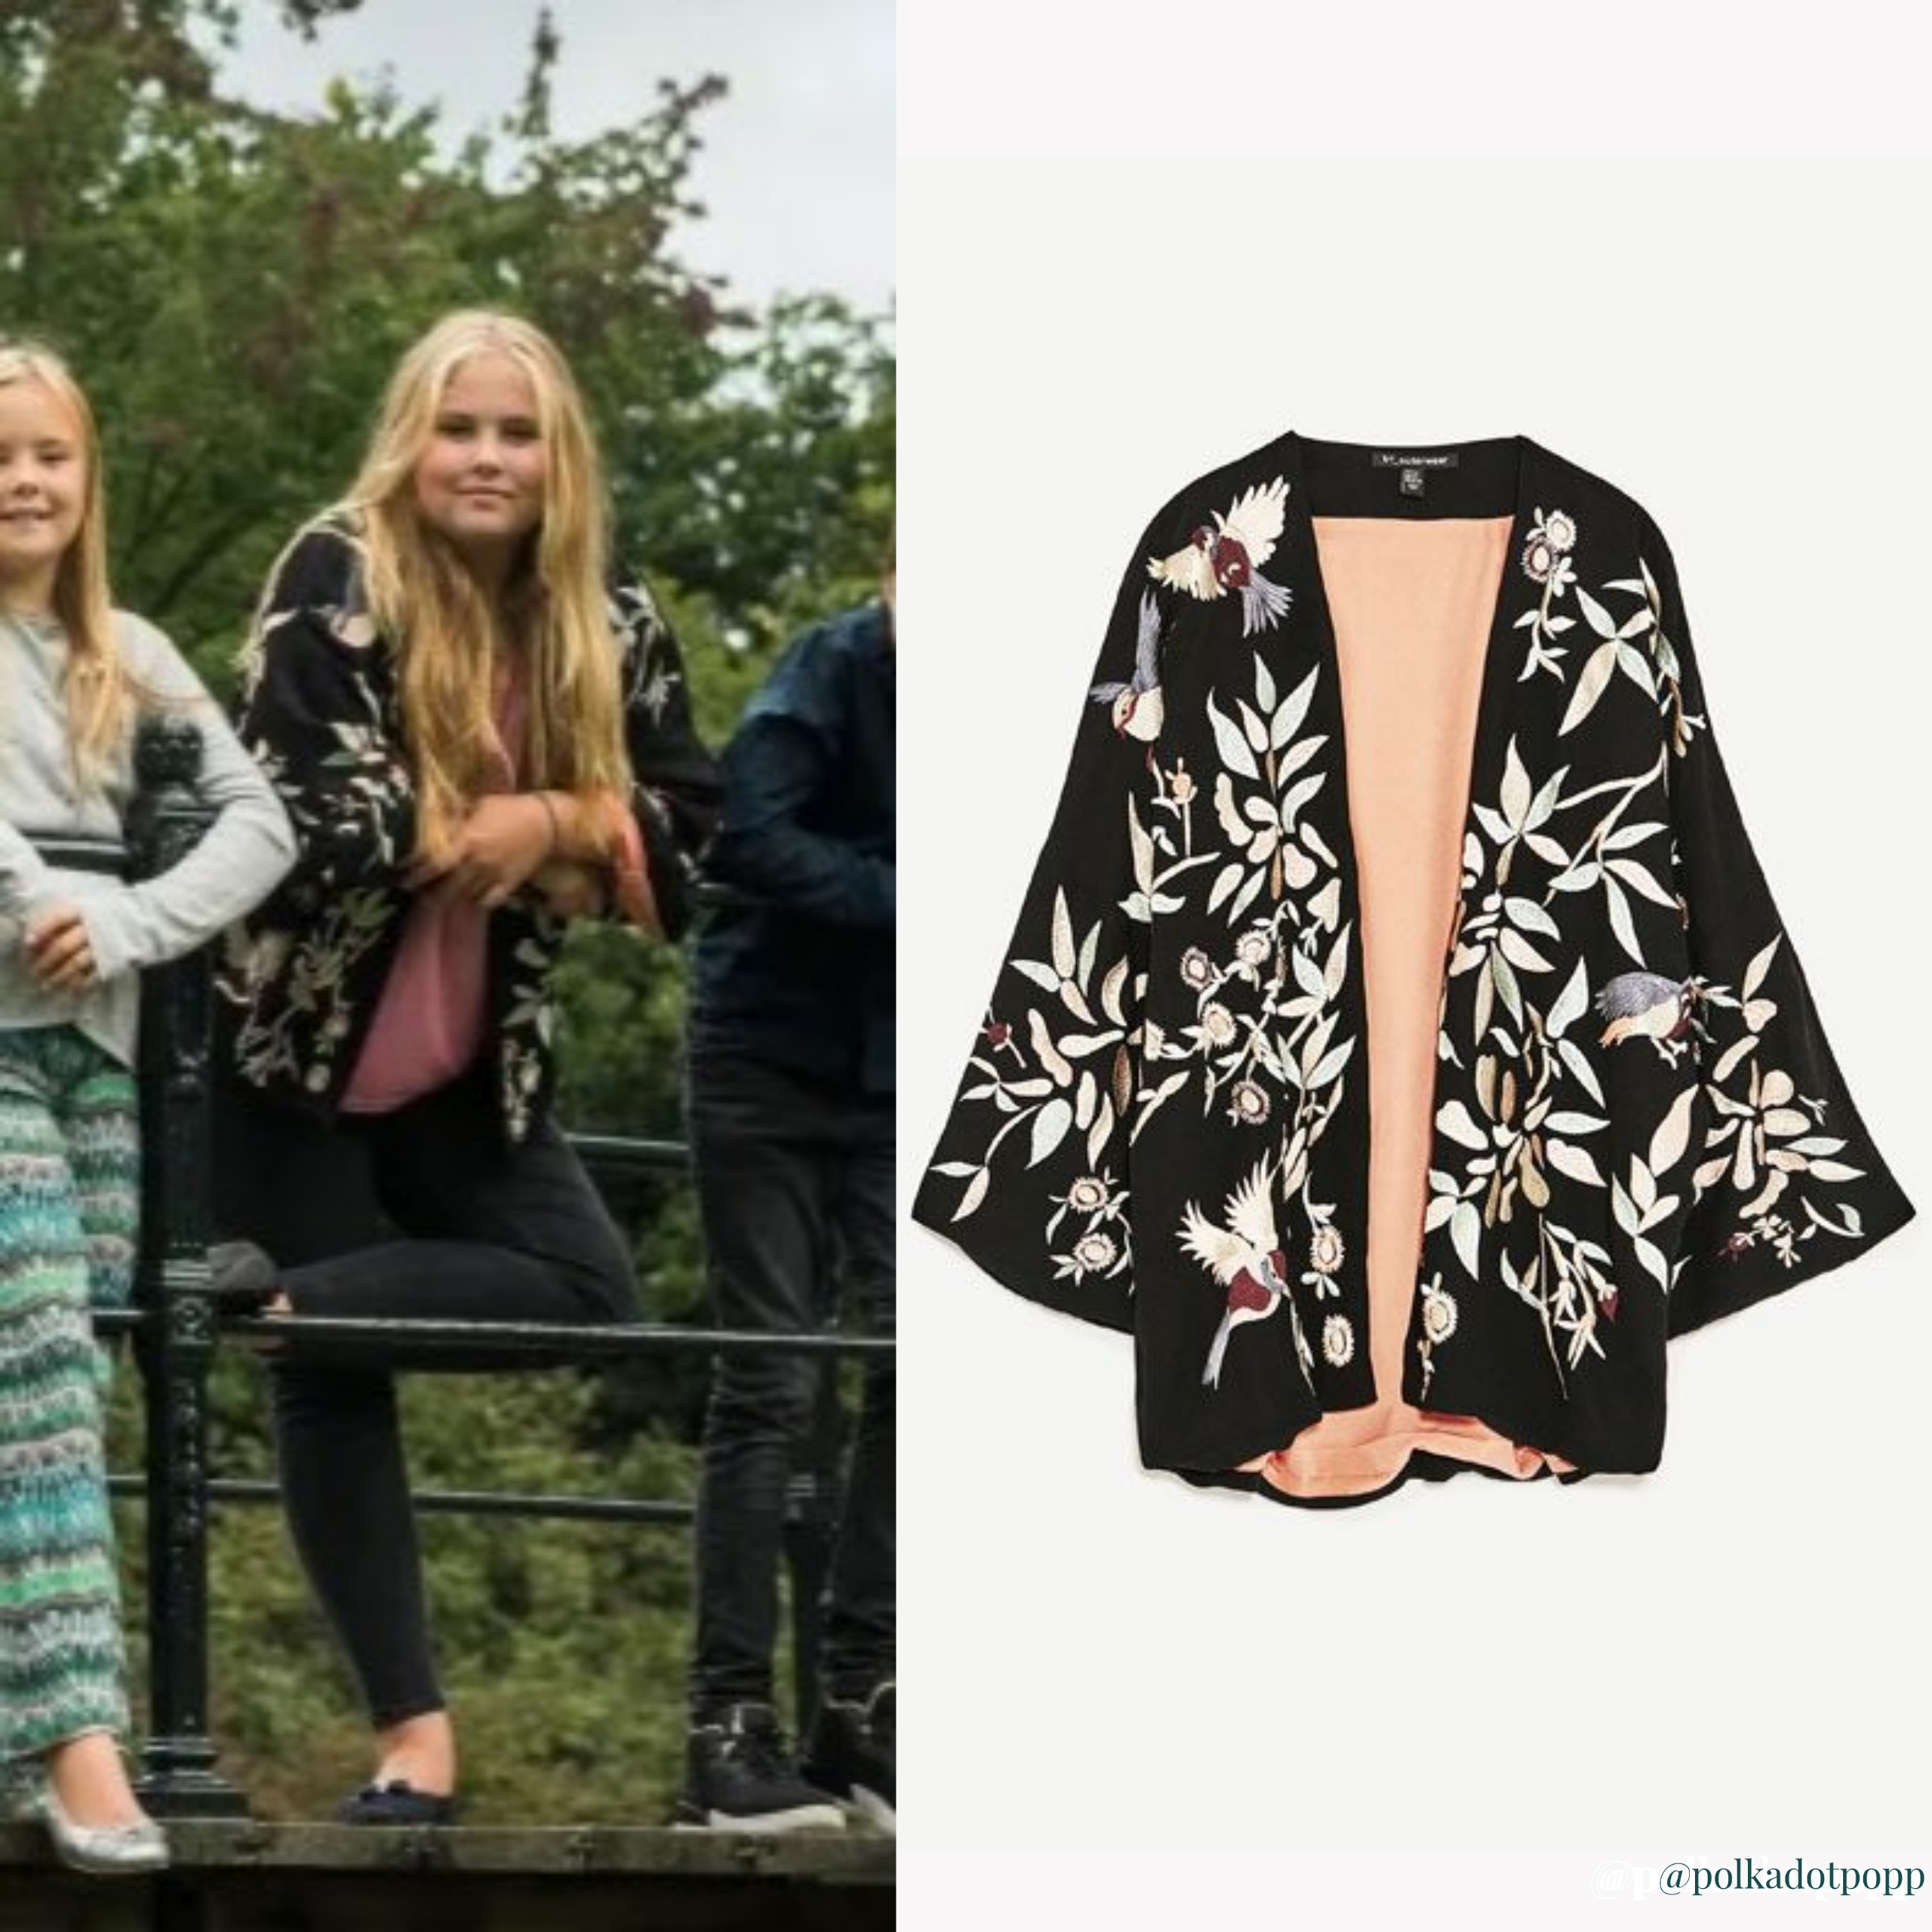 mostaza gráfico dosis Polka Popp on Twitter: "Not sure if this was ID'd at the time -  Catharina-Amalia, Princess of Orange wore this Zara floral embroidered  kimono jacket in January 2018. https://t.co/CfwwkM8bMp" / Twitter